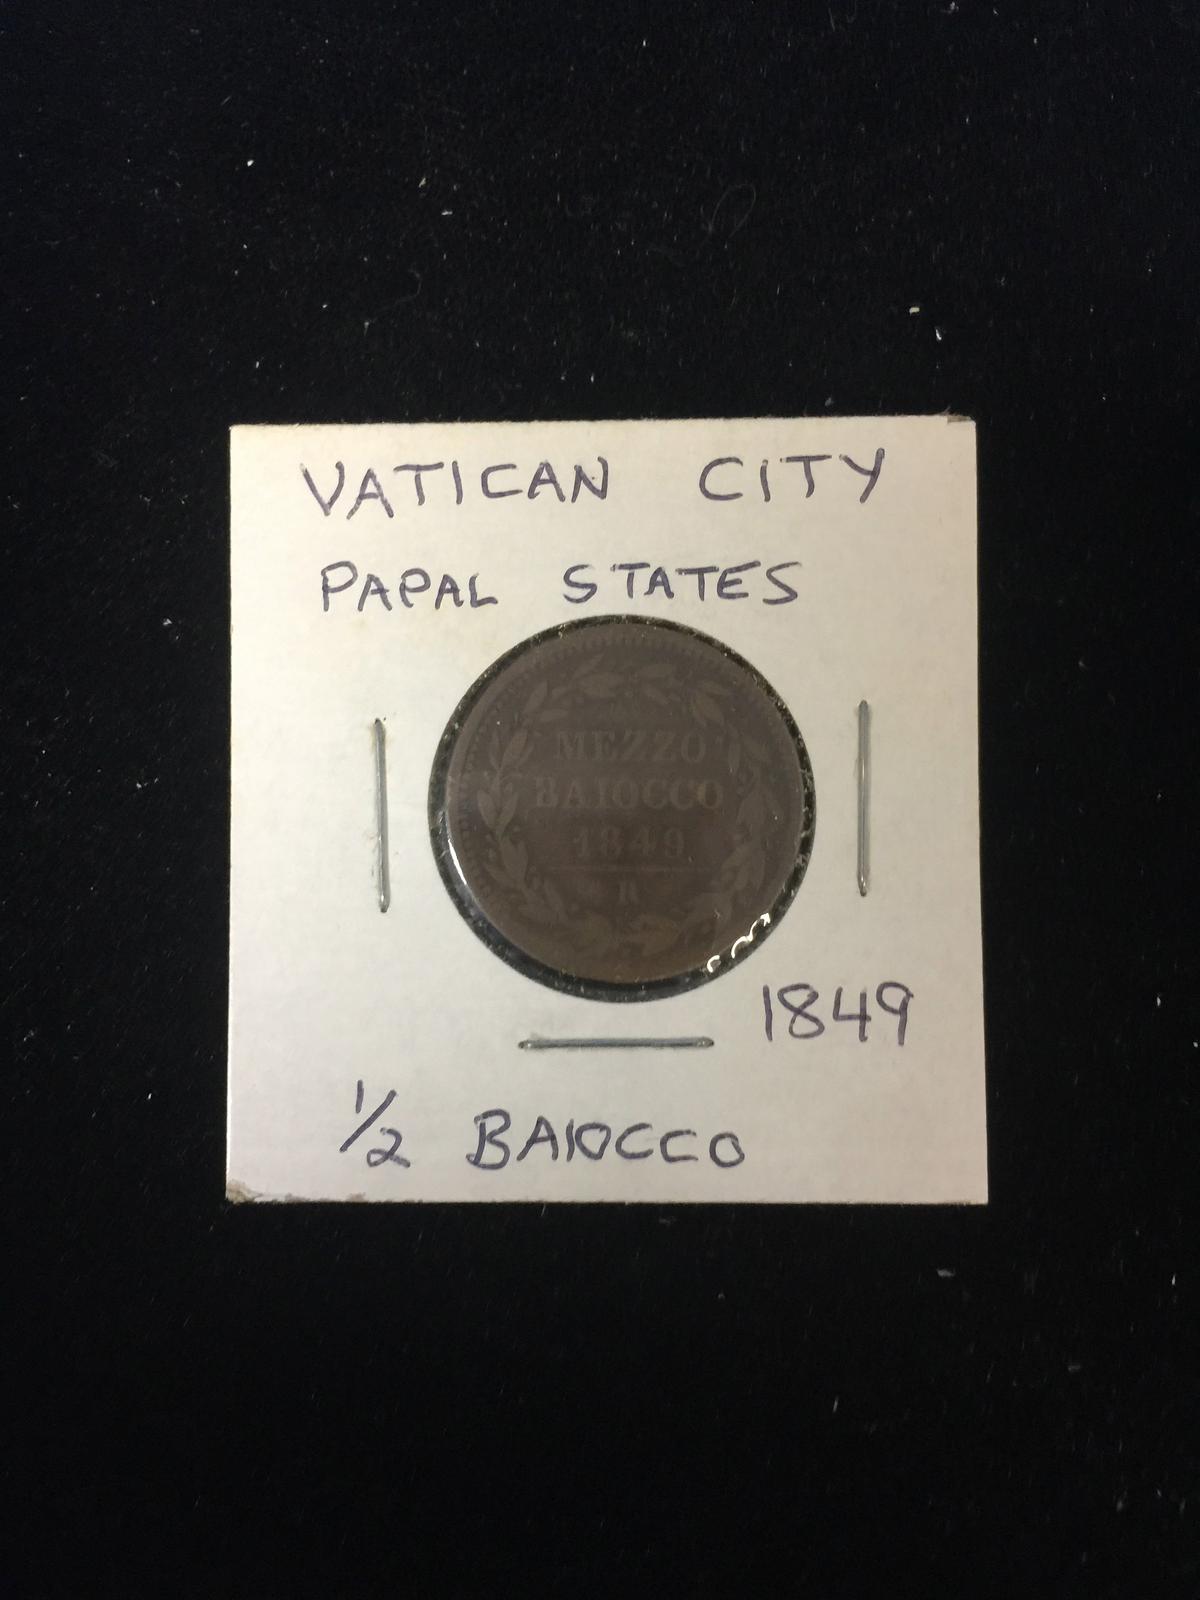 1849 Vatican City Papal States - 1/2 Baiocco - Foreign Coin in Holder